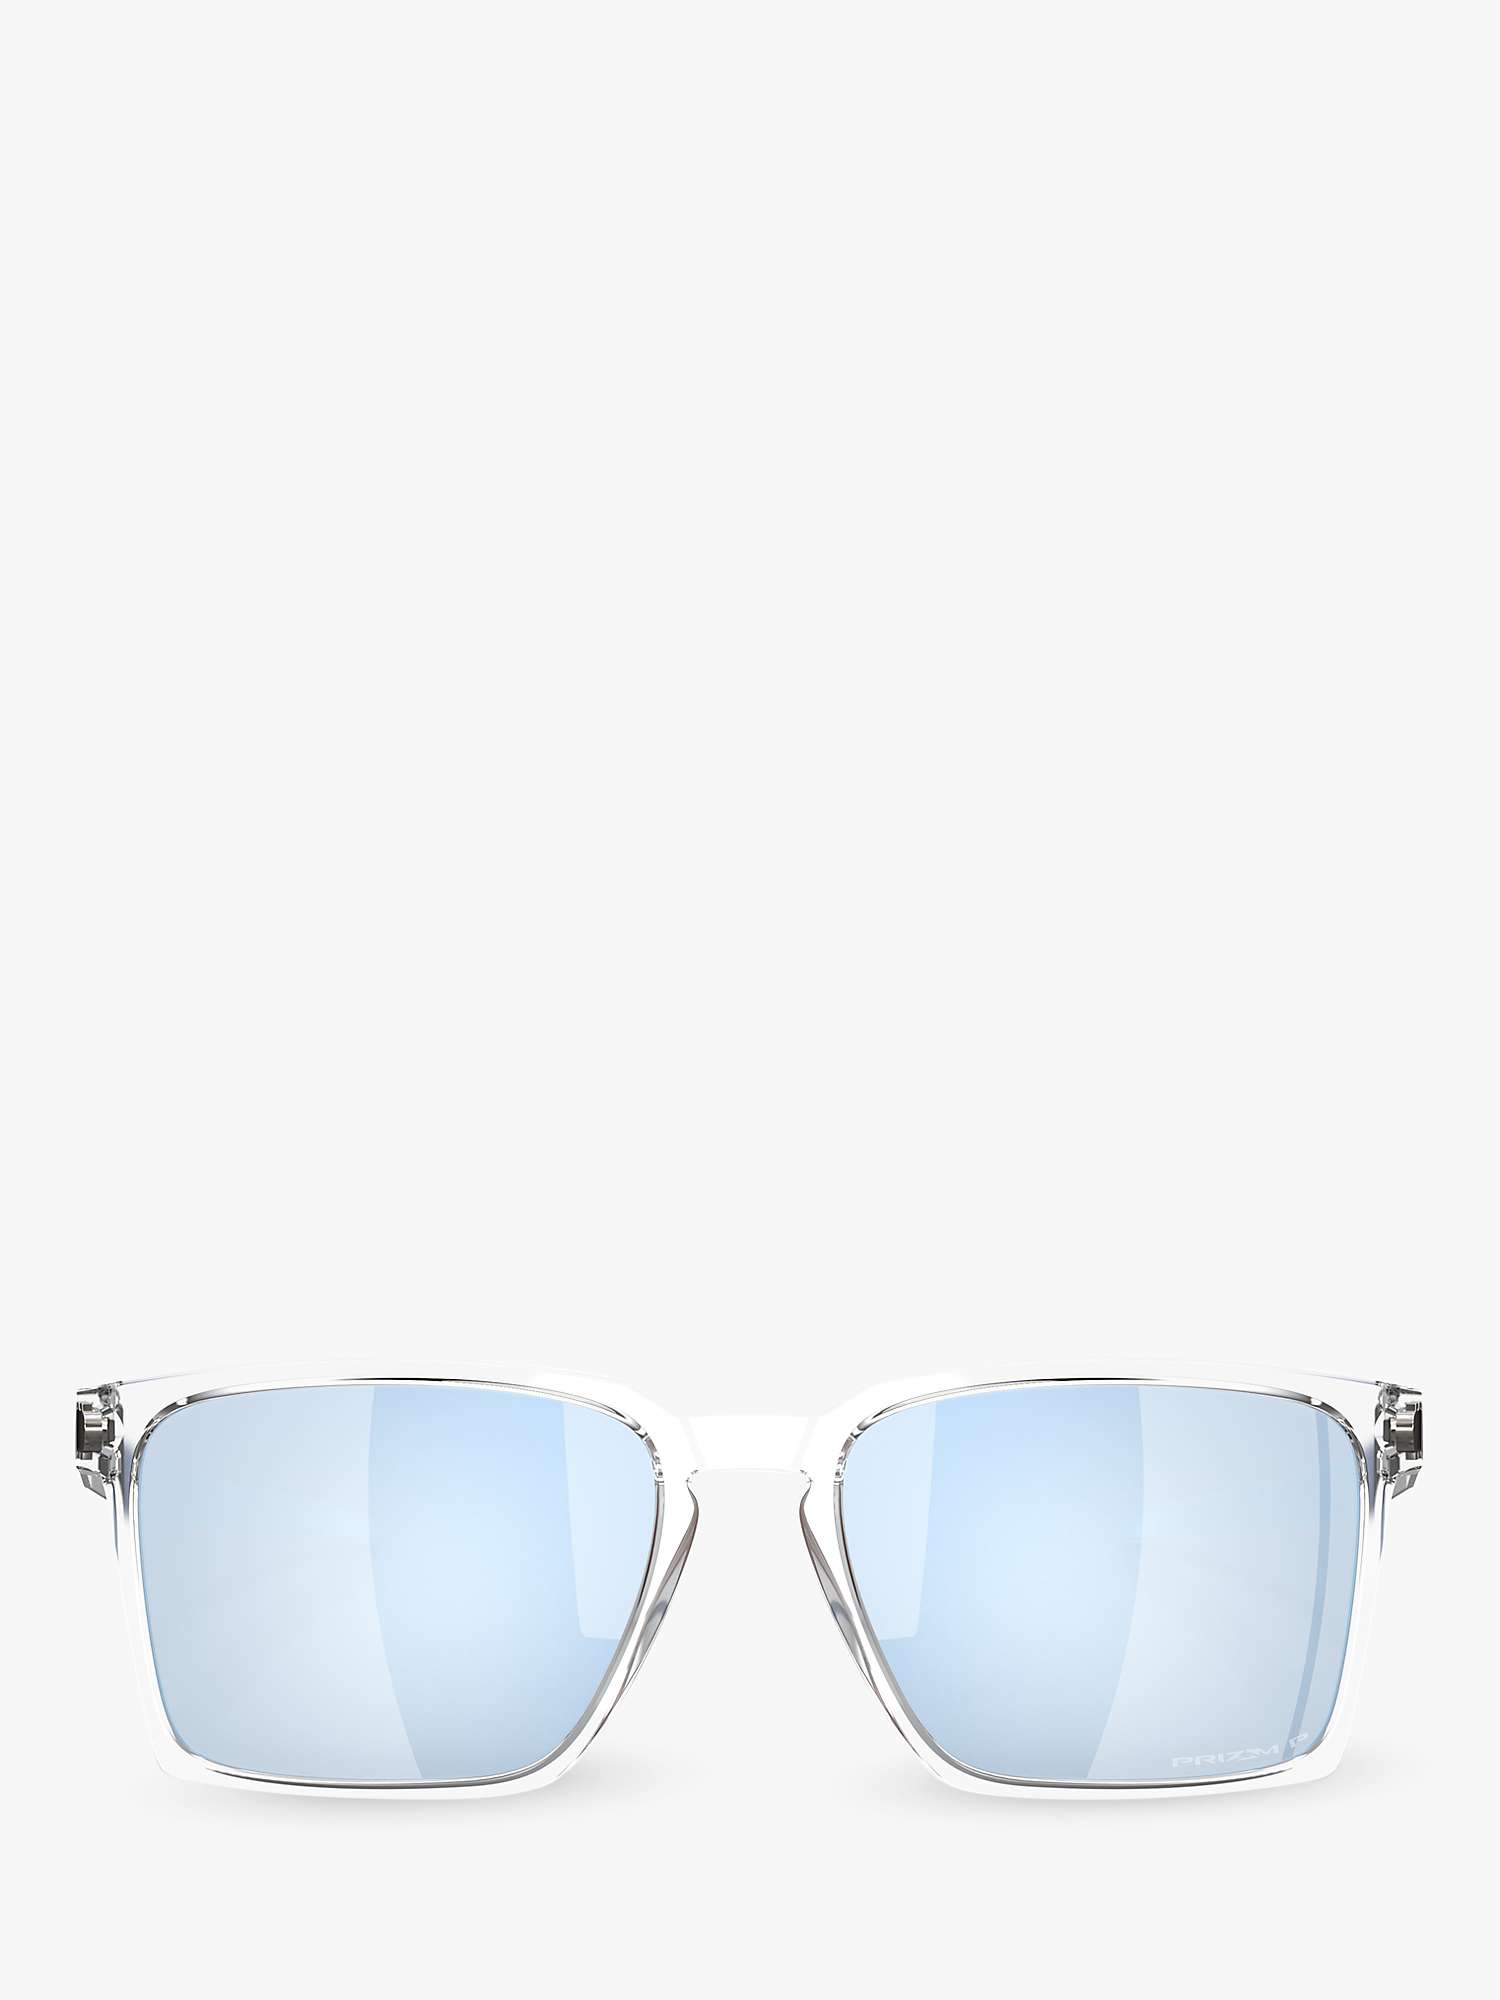 Buy Oakley OO9483 Polarised Rectangular Sunglasses, Polished Clear Online at johnlewis.com